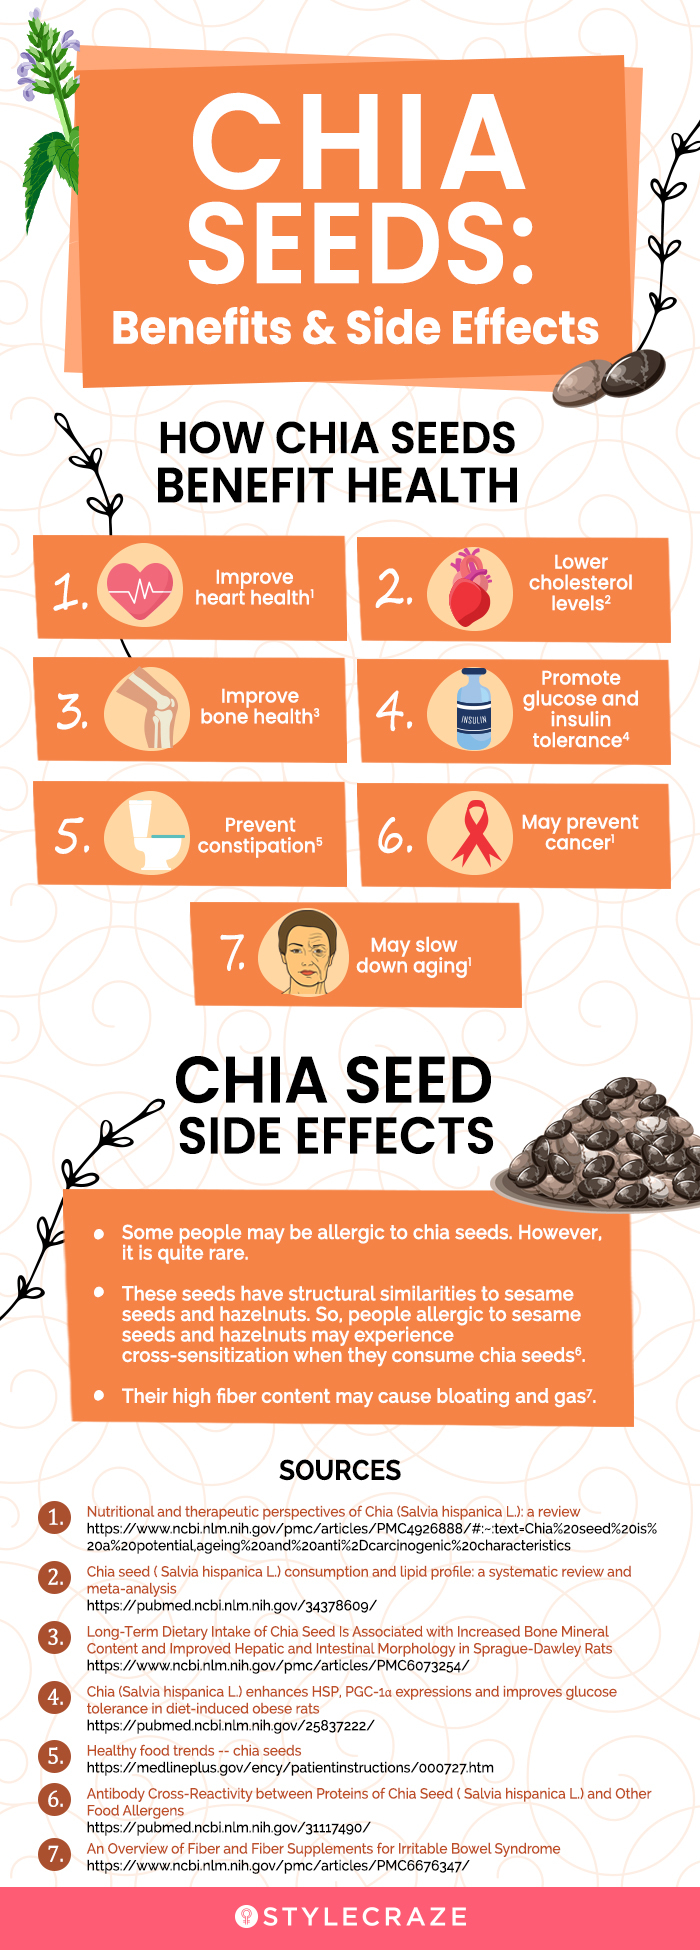 health benefits of chia seeds [infographic]